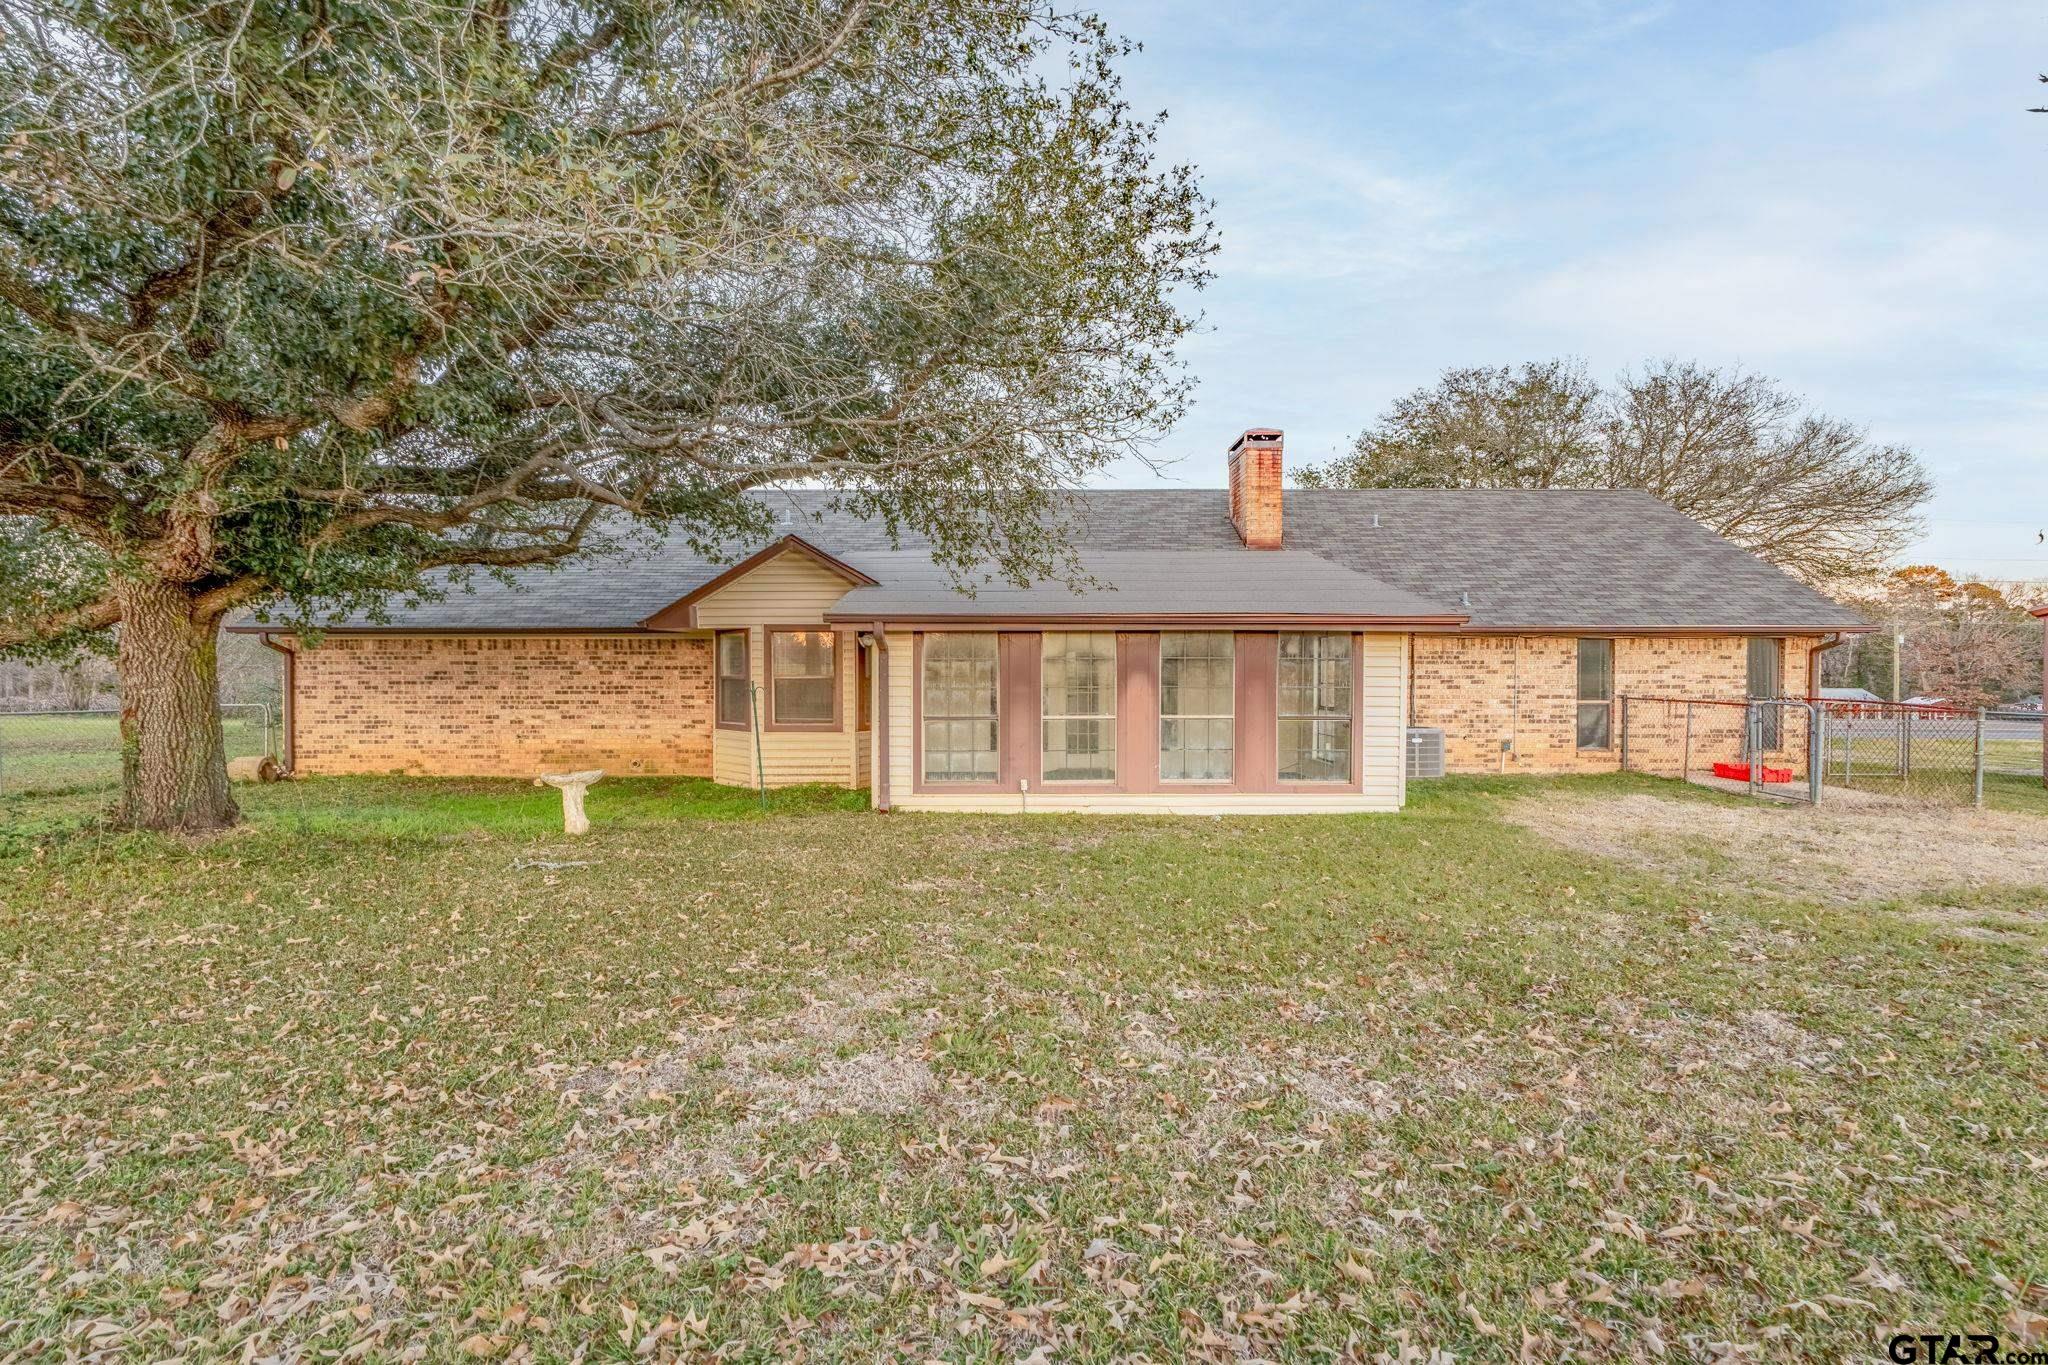 20380 Hwy 110, Whitehouse, Texas 75791, 4 Bedrooms Bedrooms, ,2 BathroomsBathrooms,Single Family Detached,For Sale,Hwy 110,24005770